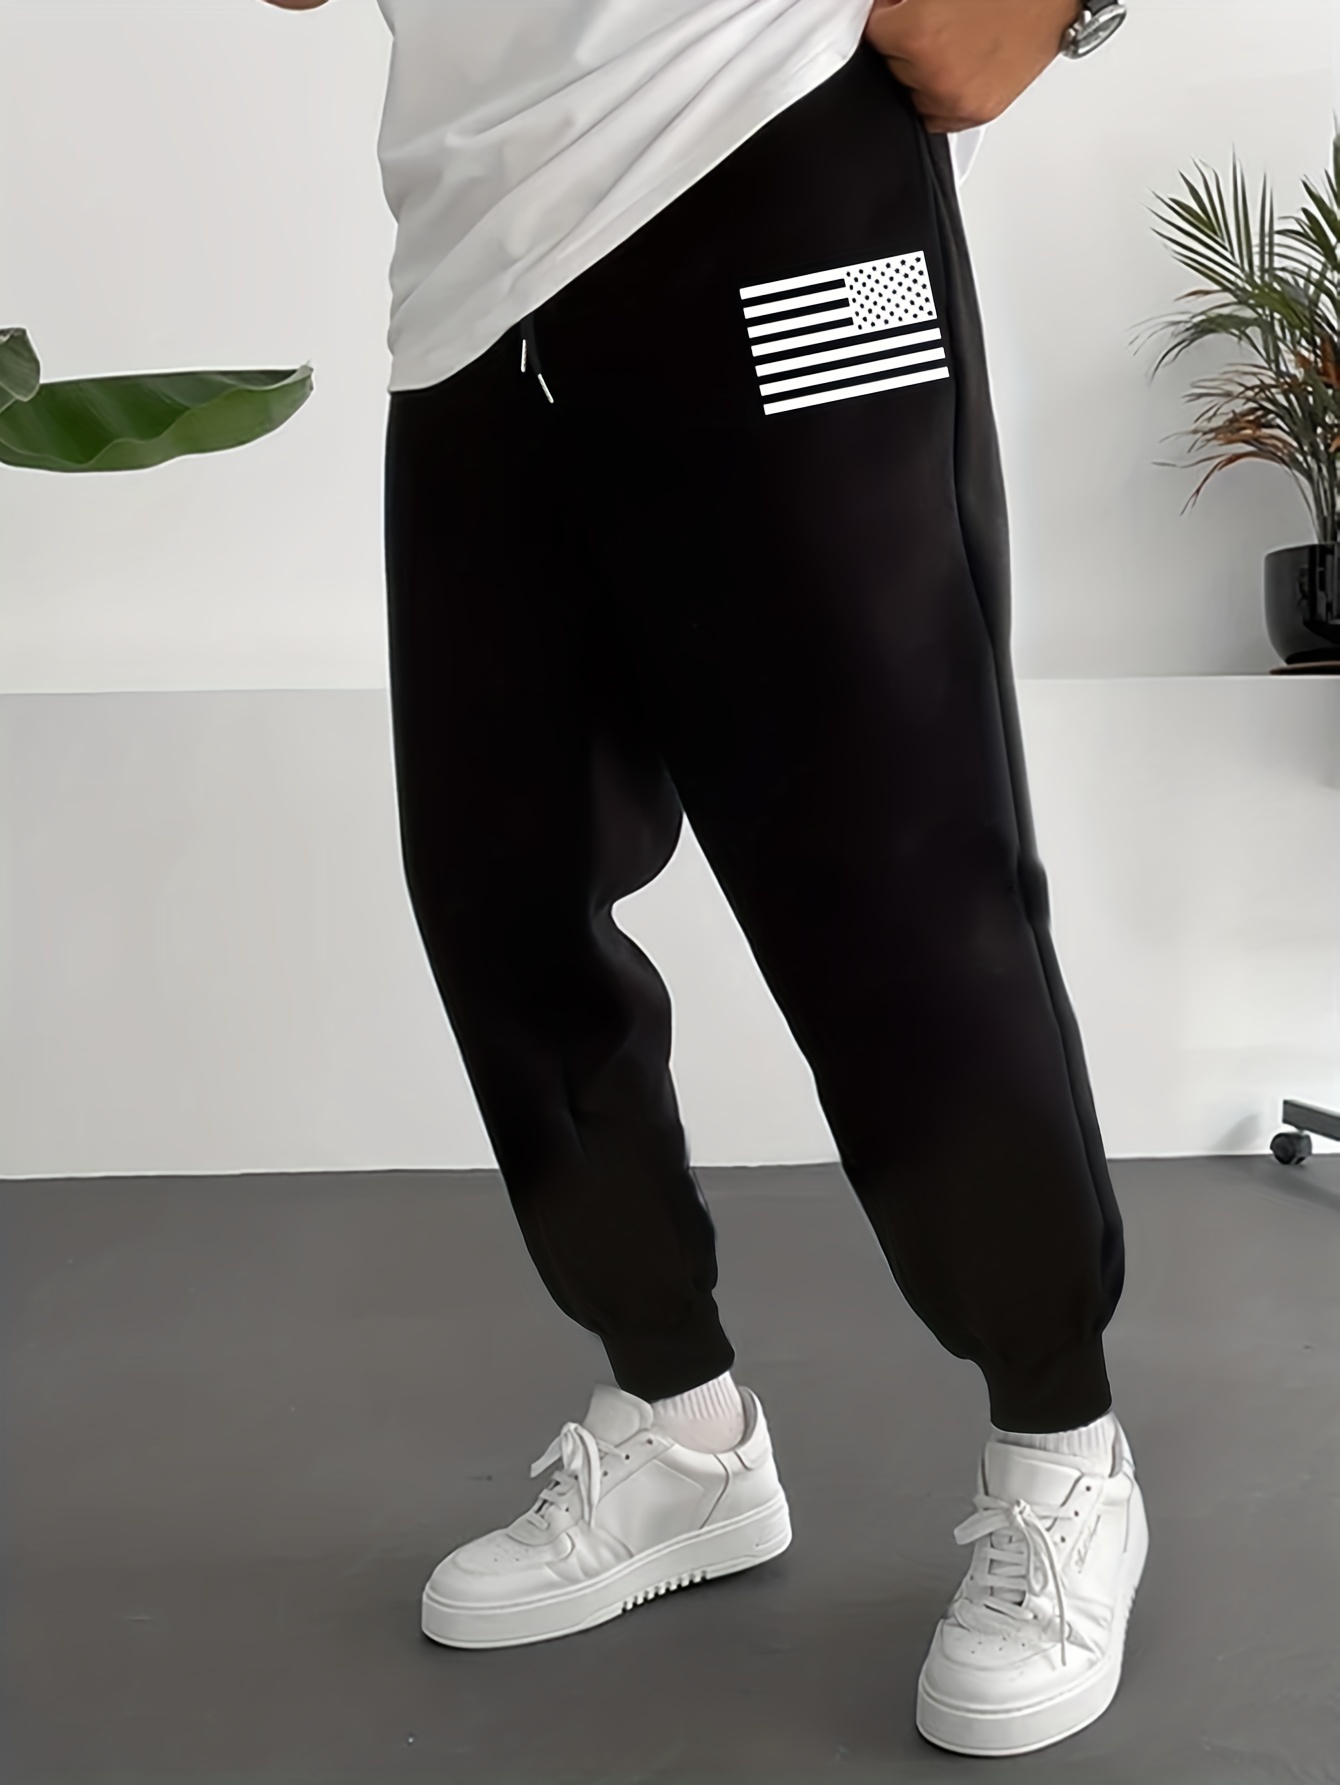 Joggers and Running Pants, Men's Outdoor Pants